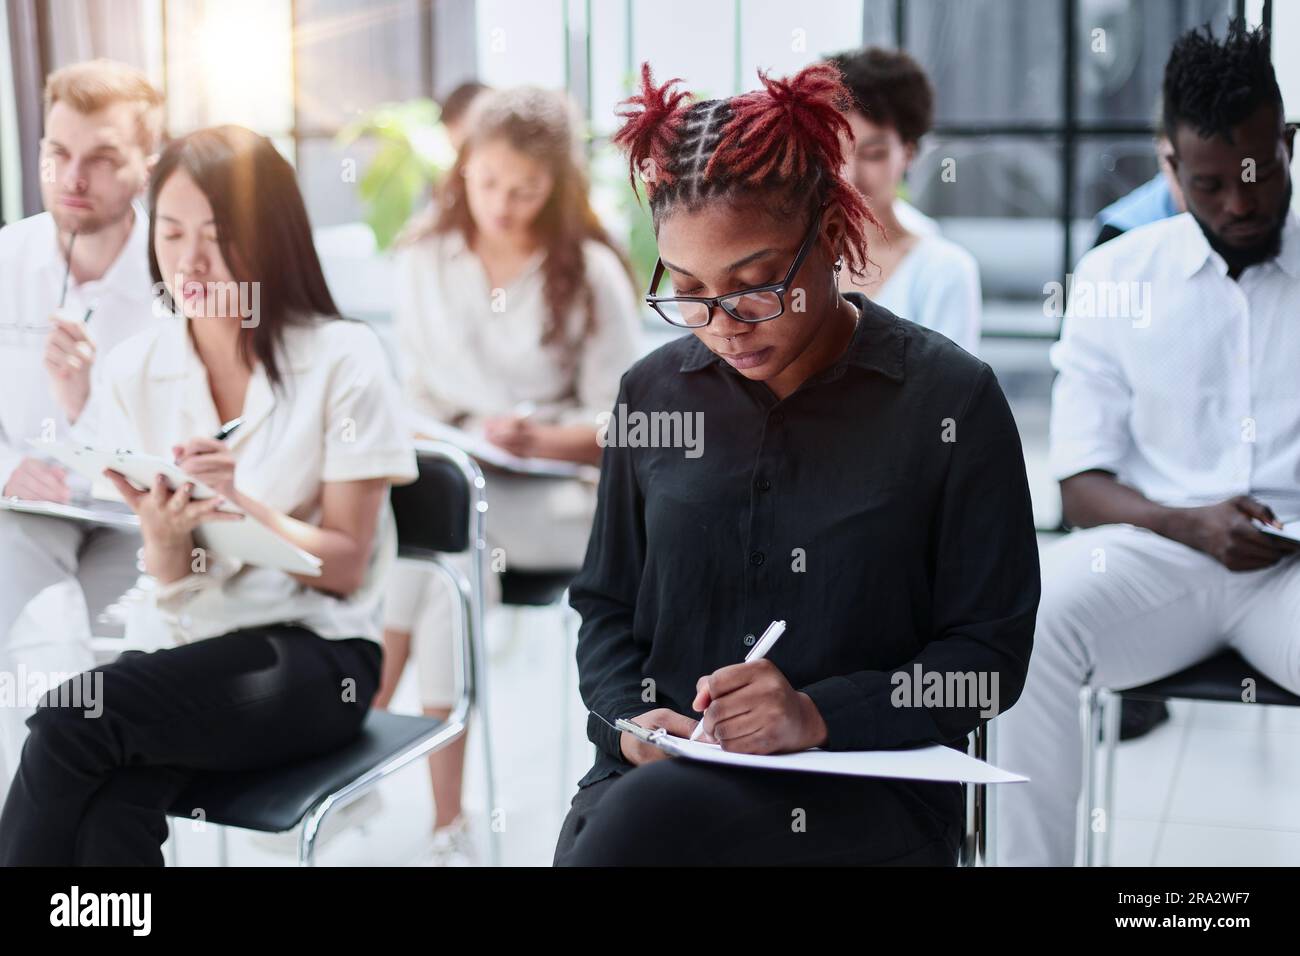 Audience at the conference hall. Business and Entrepreneurship concept. Stock Photo